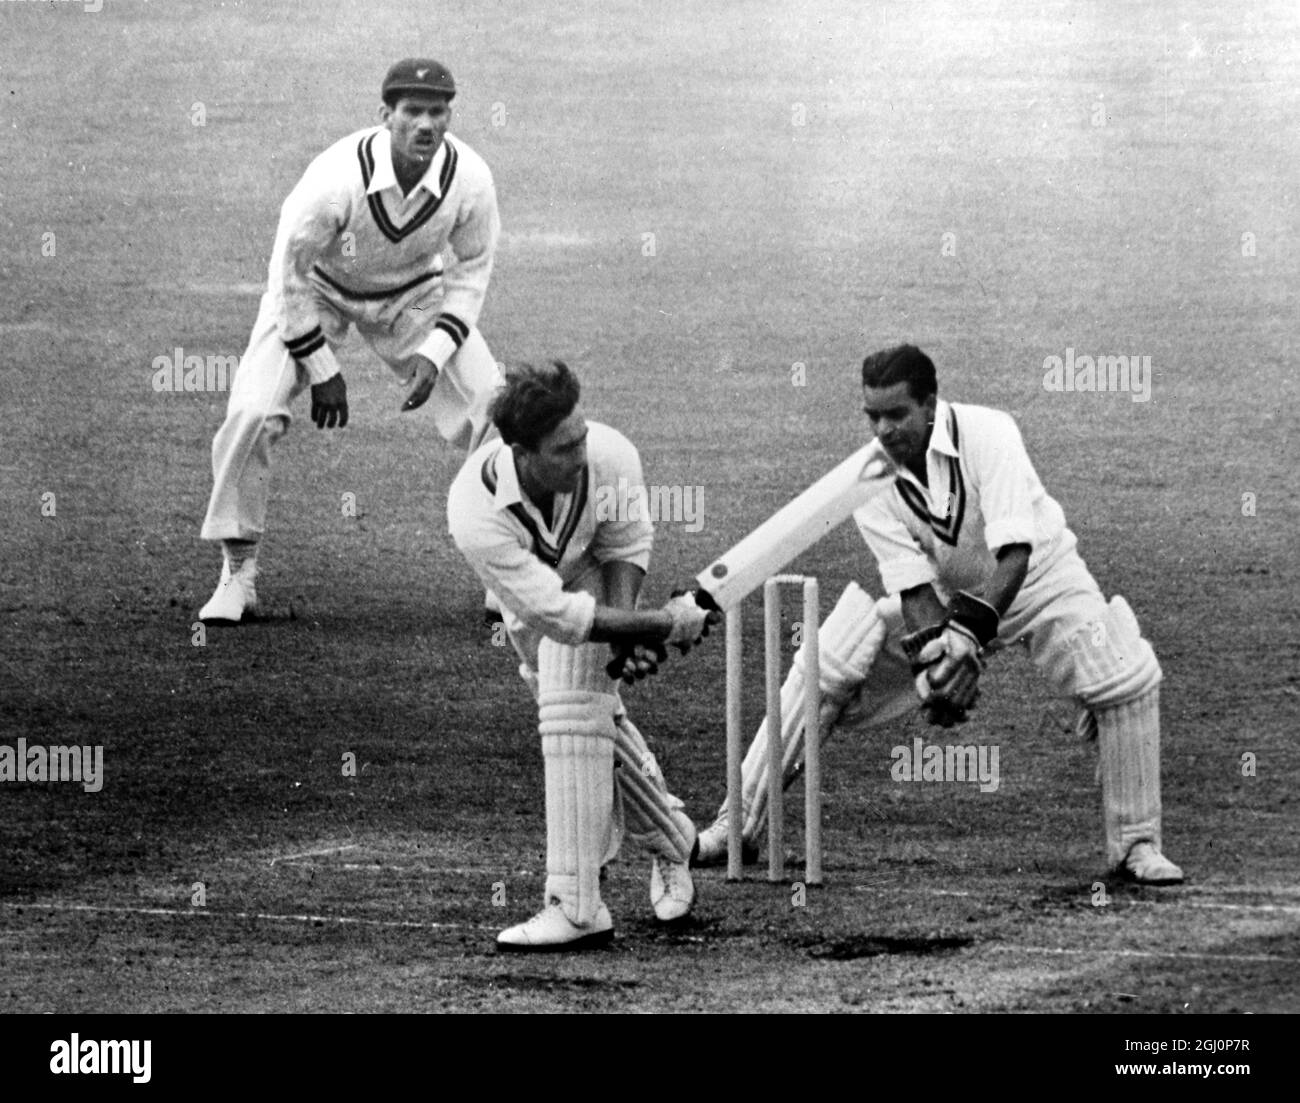 Trent Bridge , Nottingham ; Denis Compton is seen swinging at t ball from Pakistan bowler M Fazal during the Test Match between England and Pakistan at Trent Bridge . It was Compton ' s hundredth innings for England and he celoebrated the occasion by producing the highest individual score recorded in Test Cricket since the late war . His total score at the fall of his wicket in England ' s first innings was 278 . 3 July 1954 Stock Photo